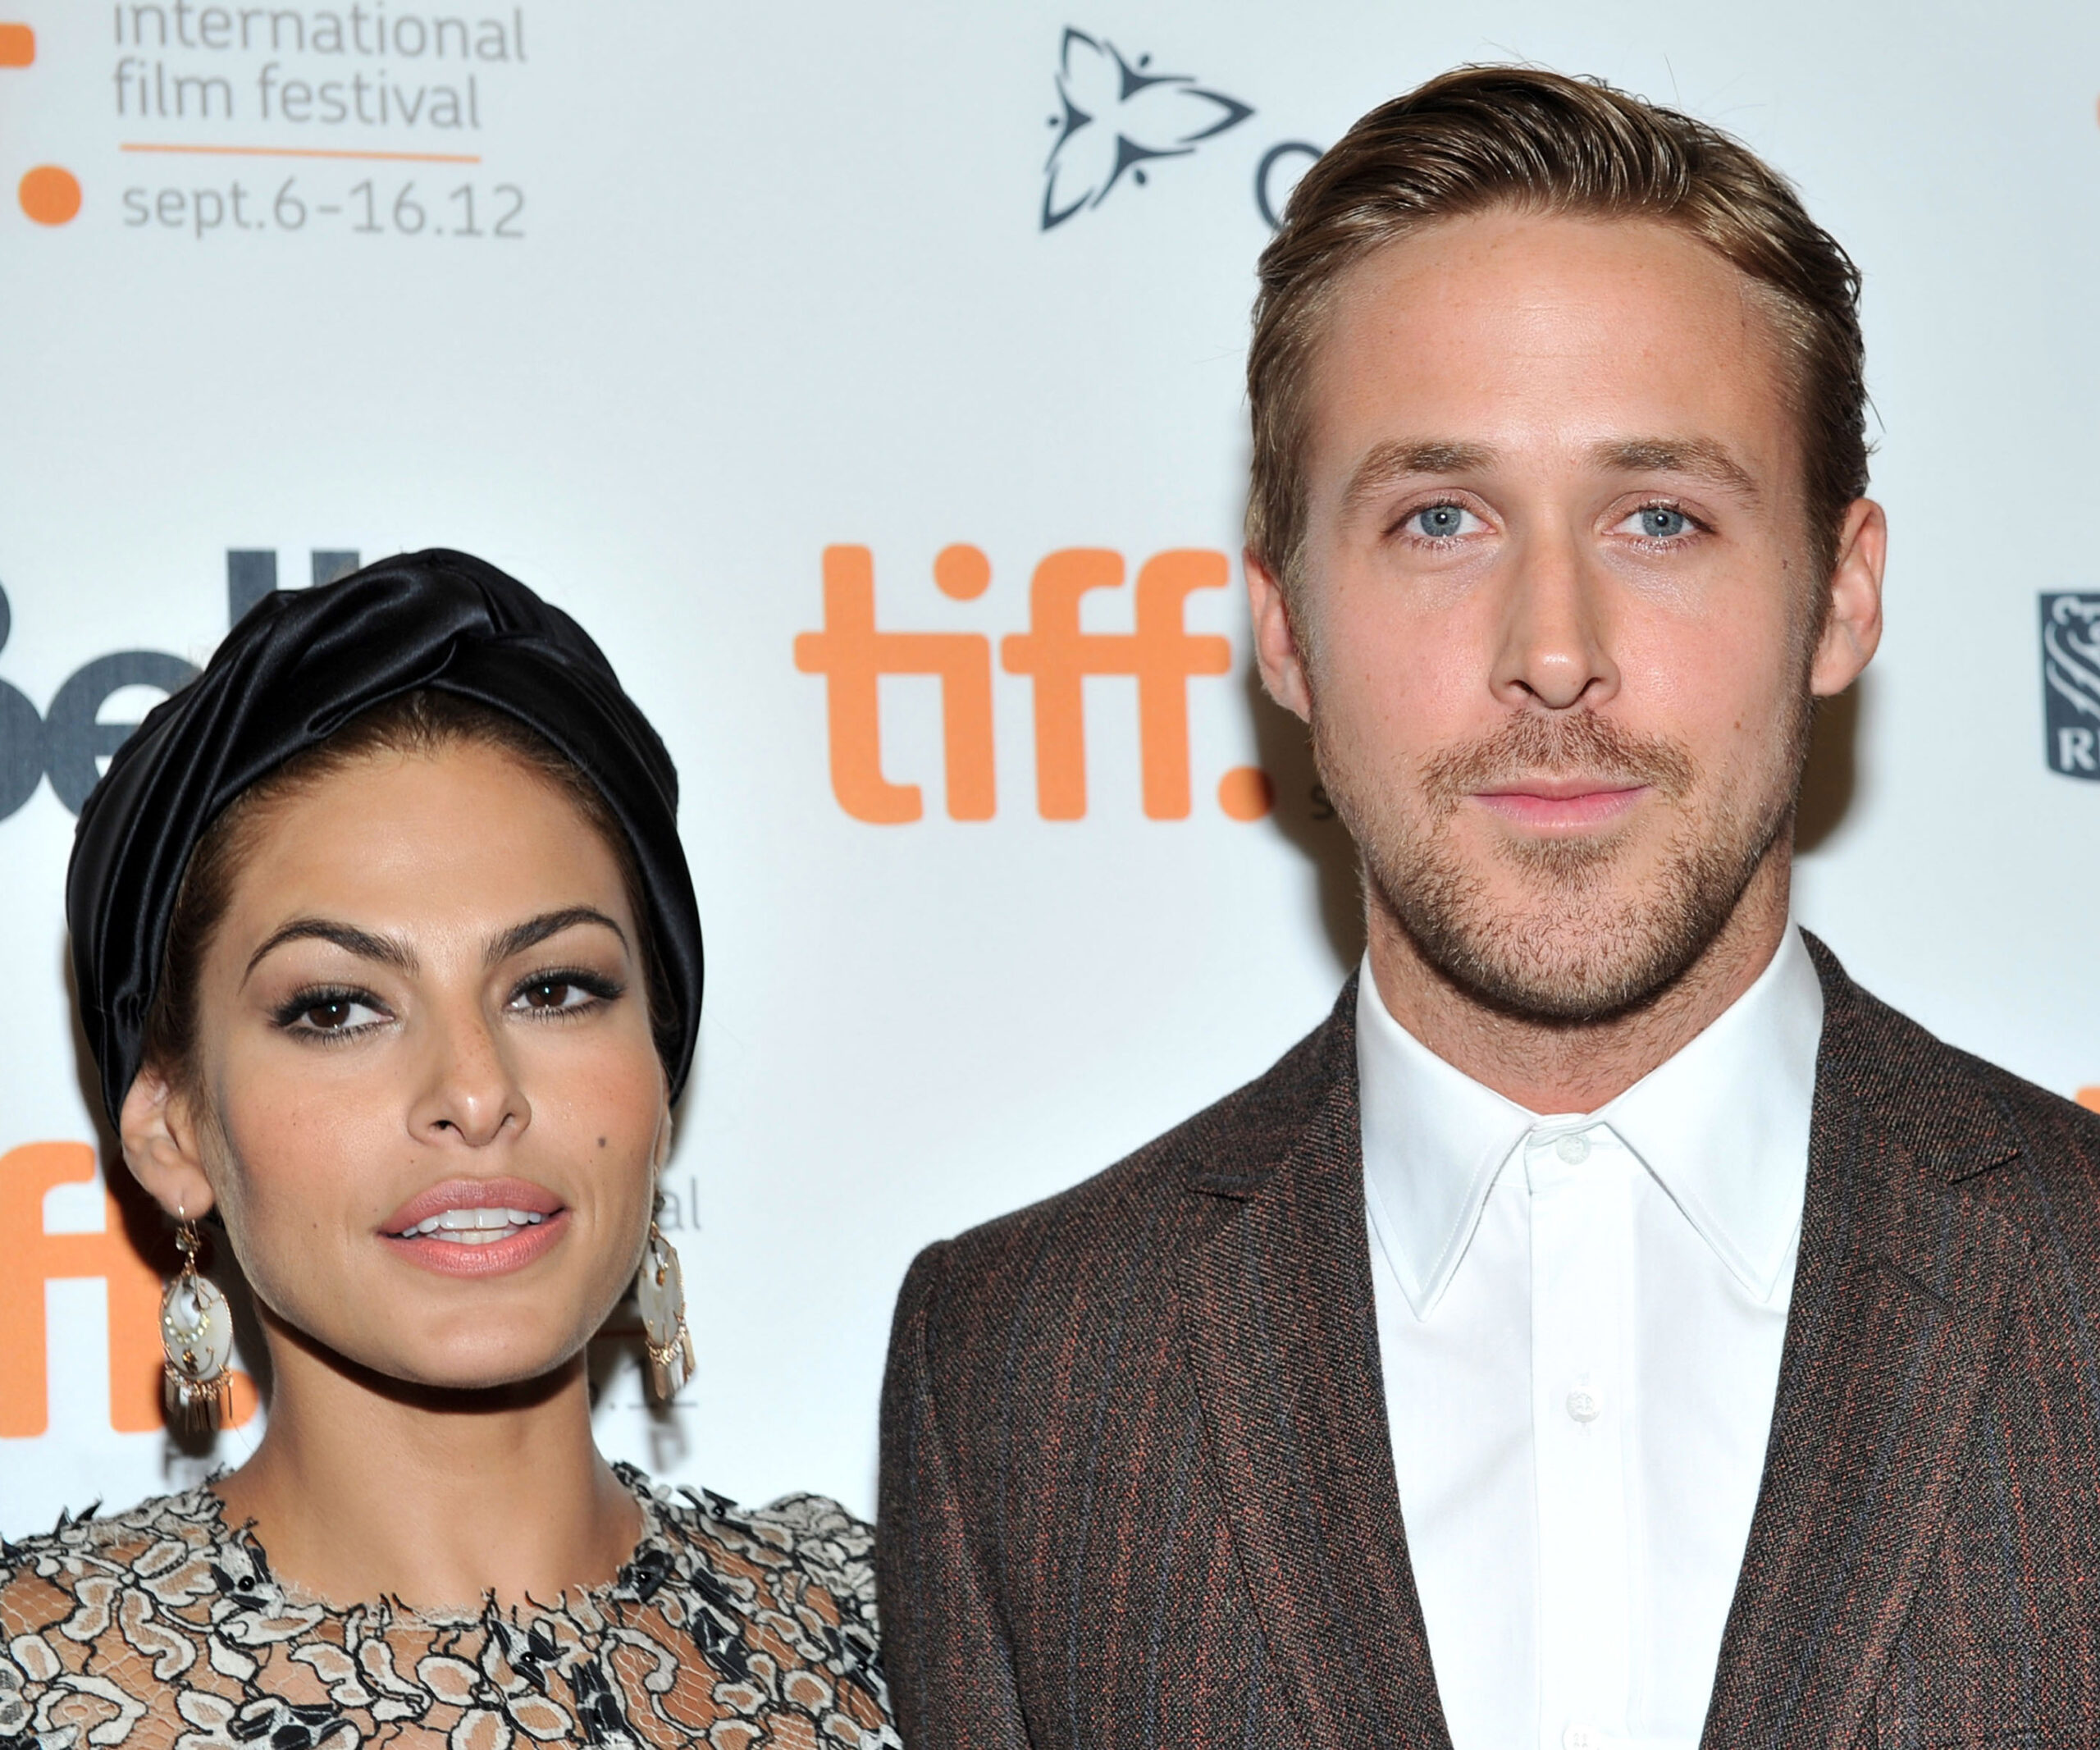 Ryan Gosling and Eva Mendes are expecting baby no. 2!